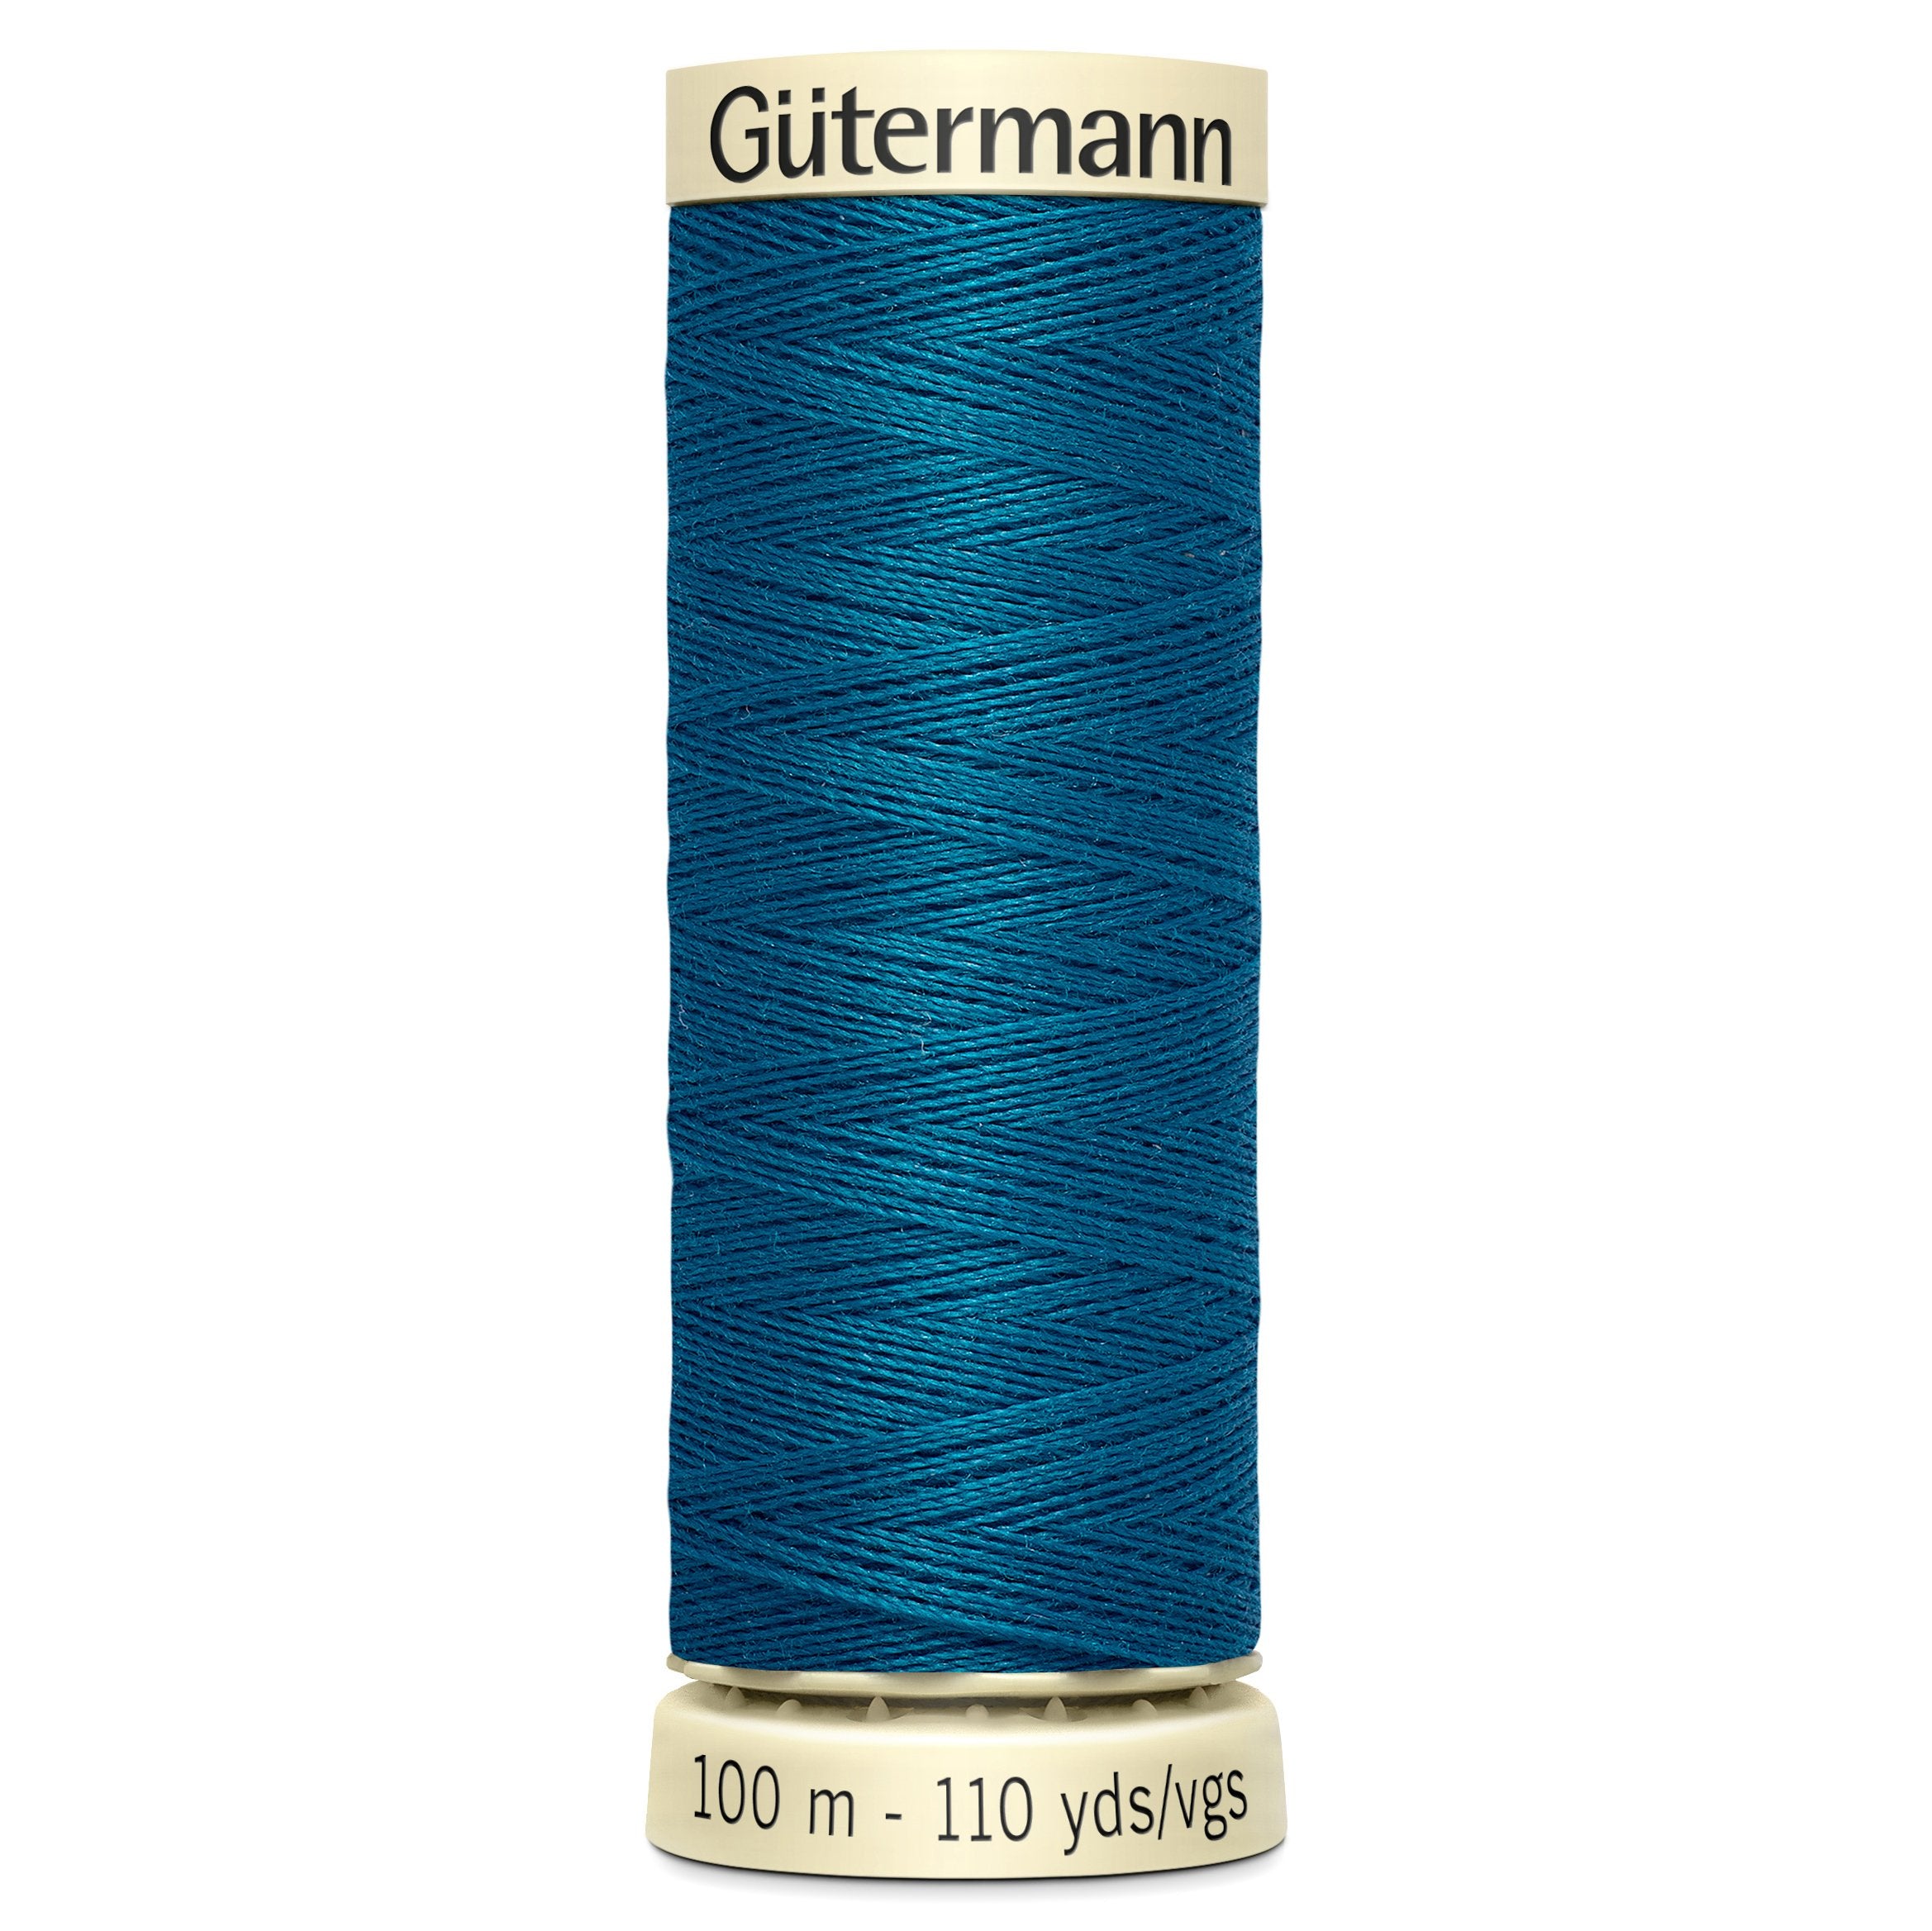 Gutermann Sew All Thread colour 483 Mid Turquoise from Jaycotts Sewing Supplies